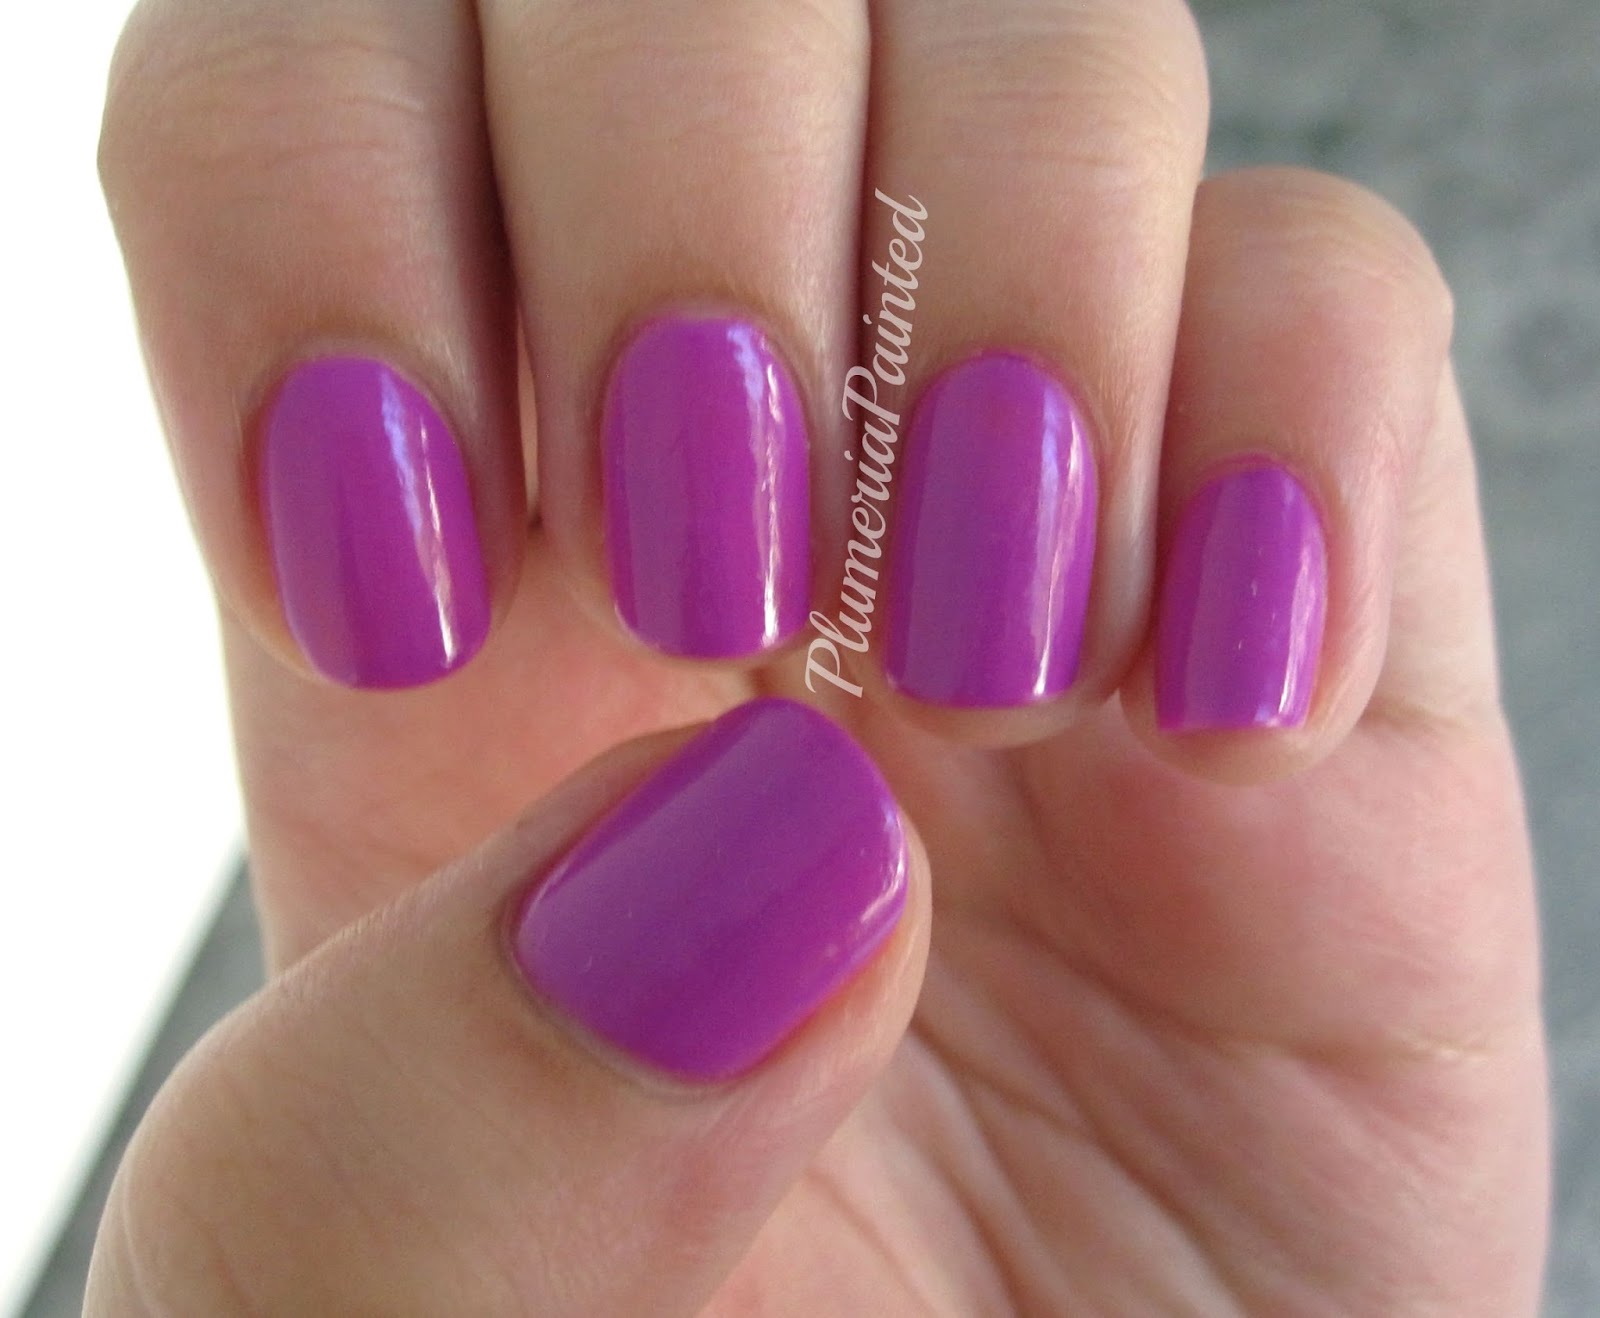 7. Orly Nail Lacquer in "Purple Crush" - wide 6